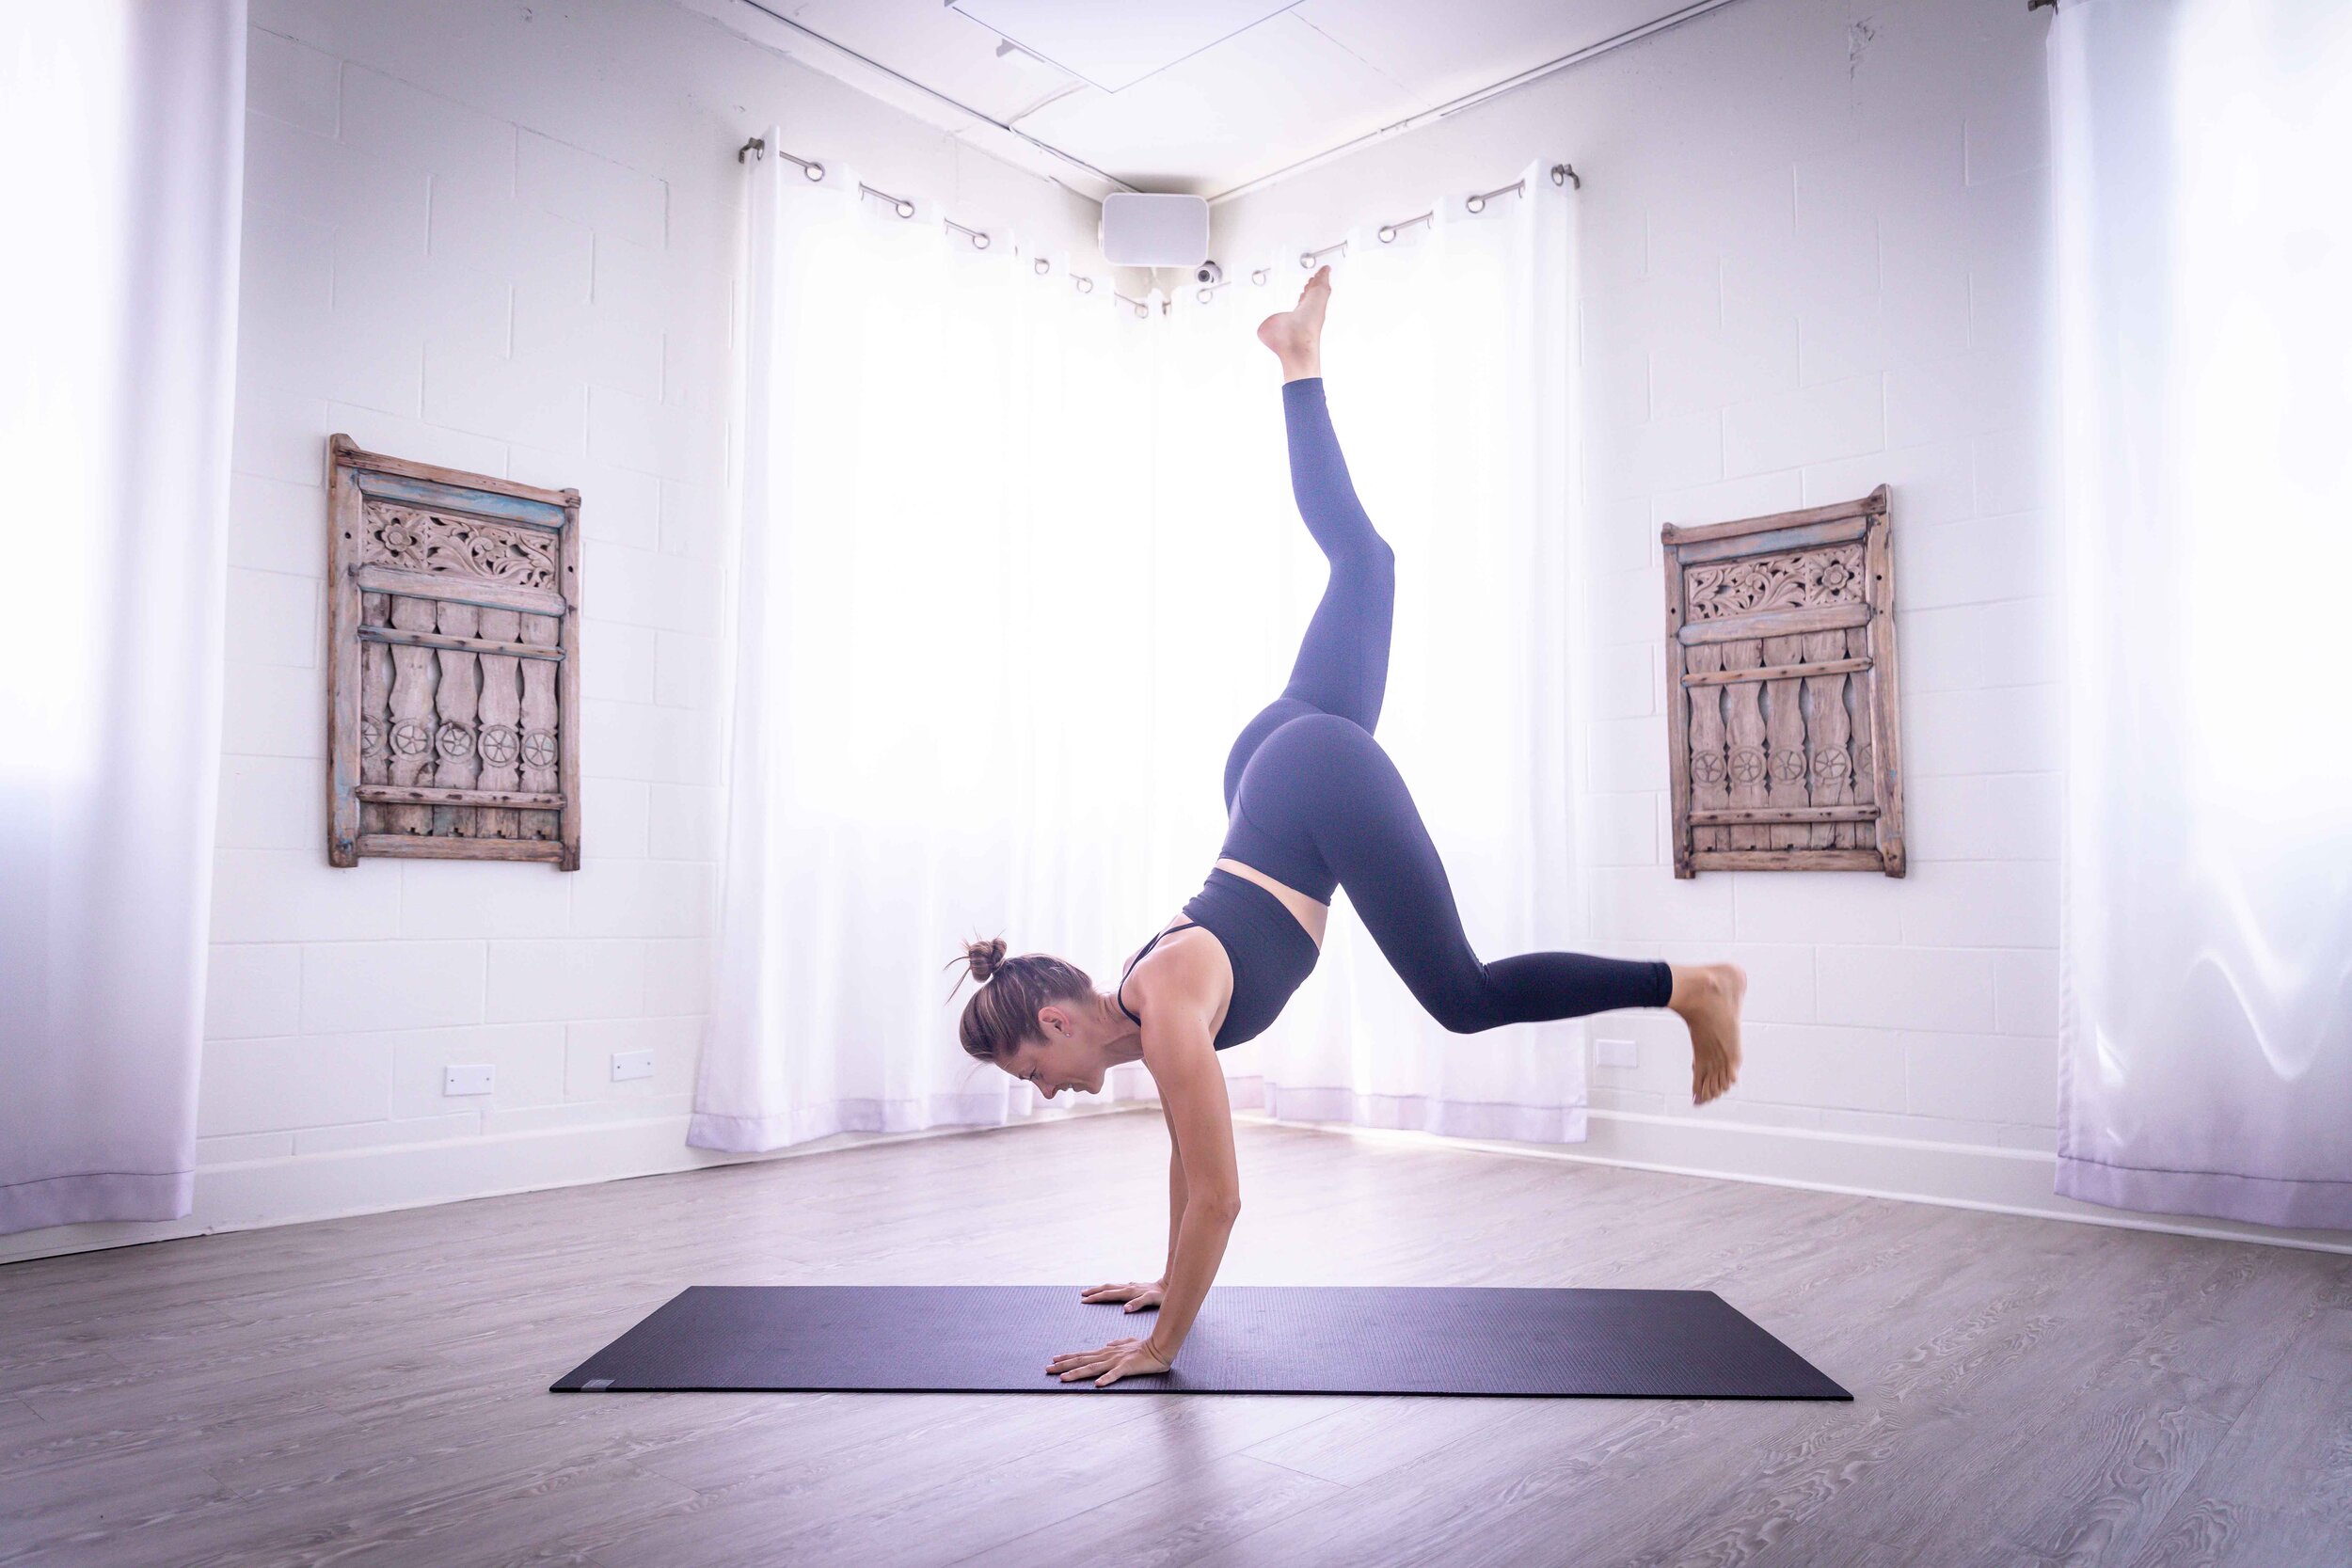 This Handstand Progression Will Prove How Strong You Are - Yoga Journal